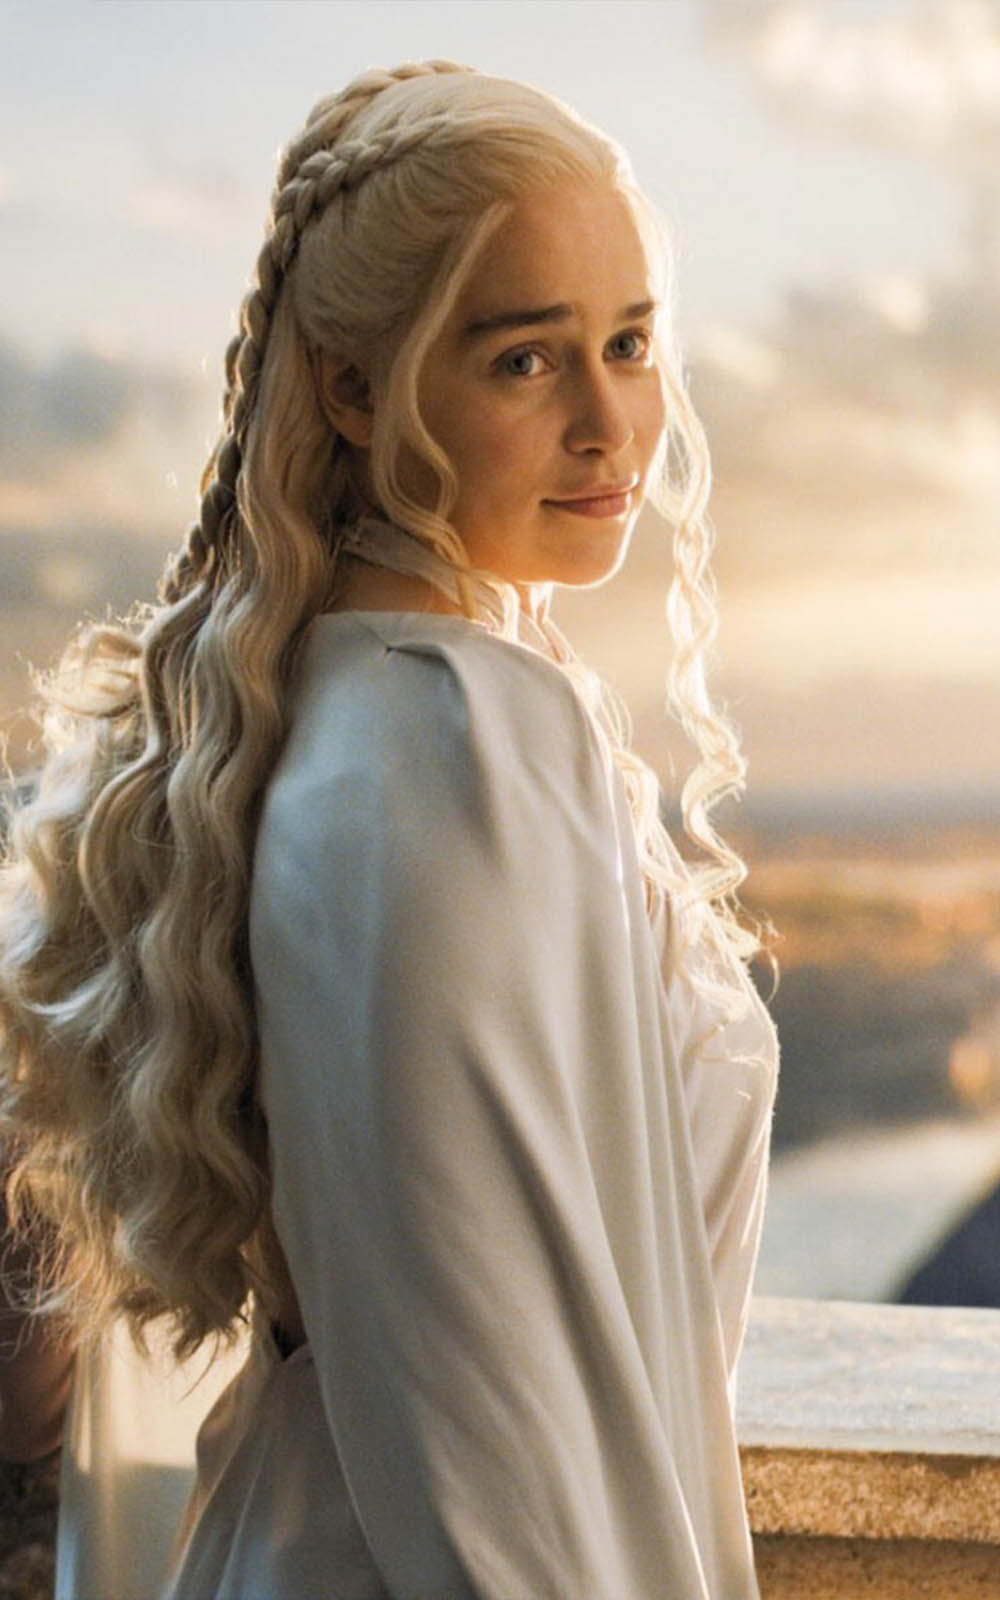 Emilia Clarke from Game of Thrones - Download Free HD Mobile Wallpapers